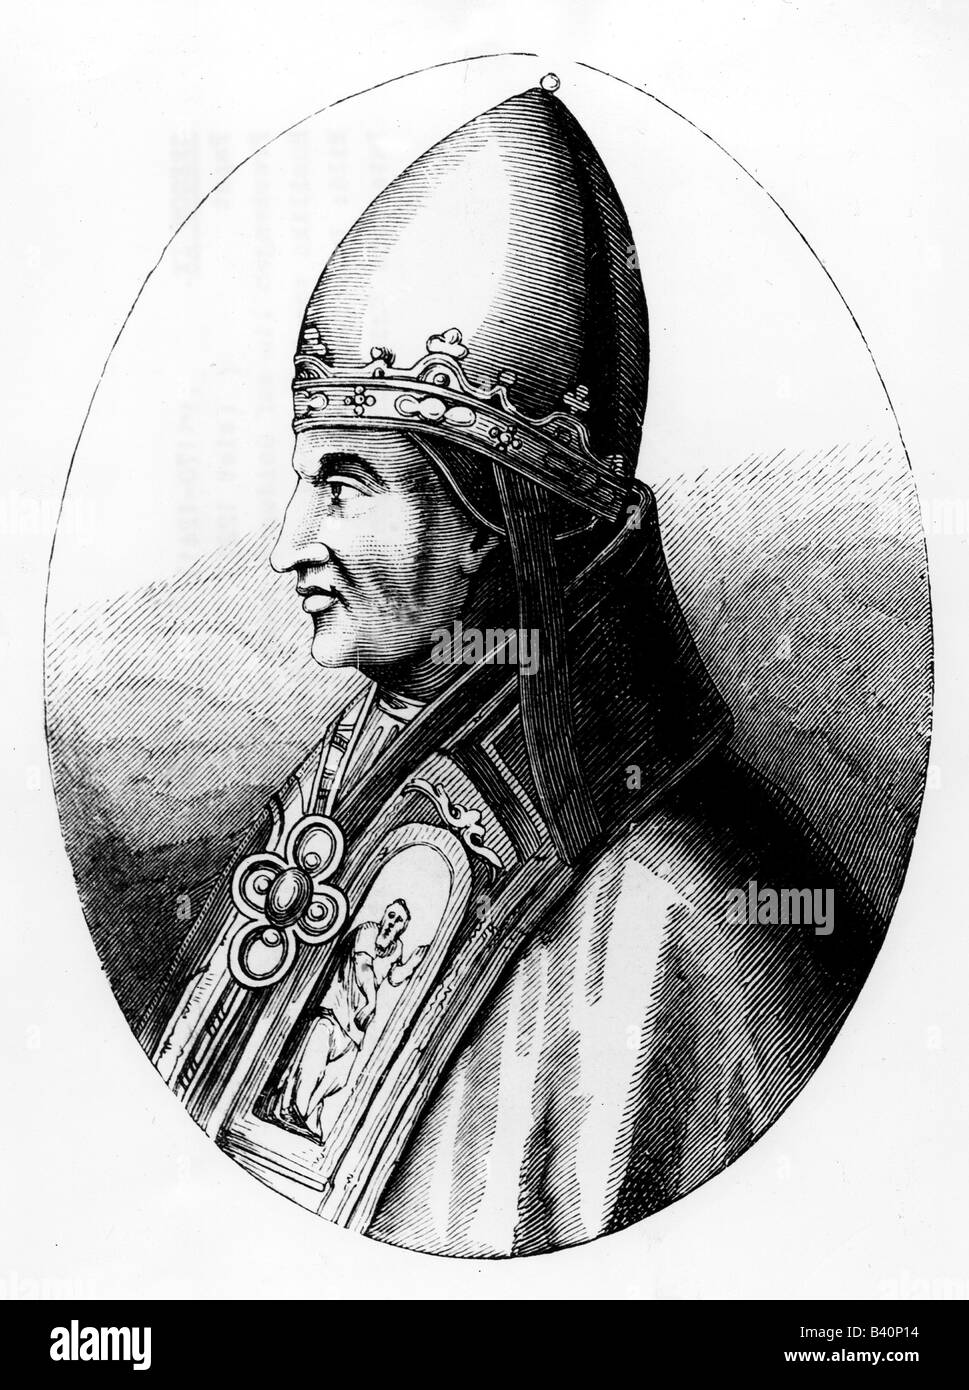 Gregory IX (Ugolino Count  Segni), circa 1170 - 21.8.1241, Pope 19.3.1227 - 21.8.1241, portrait, side view, engraving, 19th century, after fresco, San Paolo, Rome, Italian, crown, tiara, middle ages, 13th century, , Stock Photo